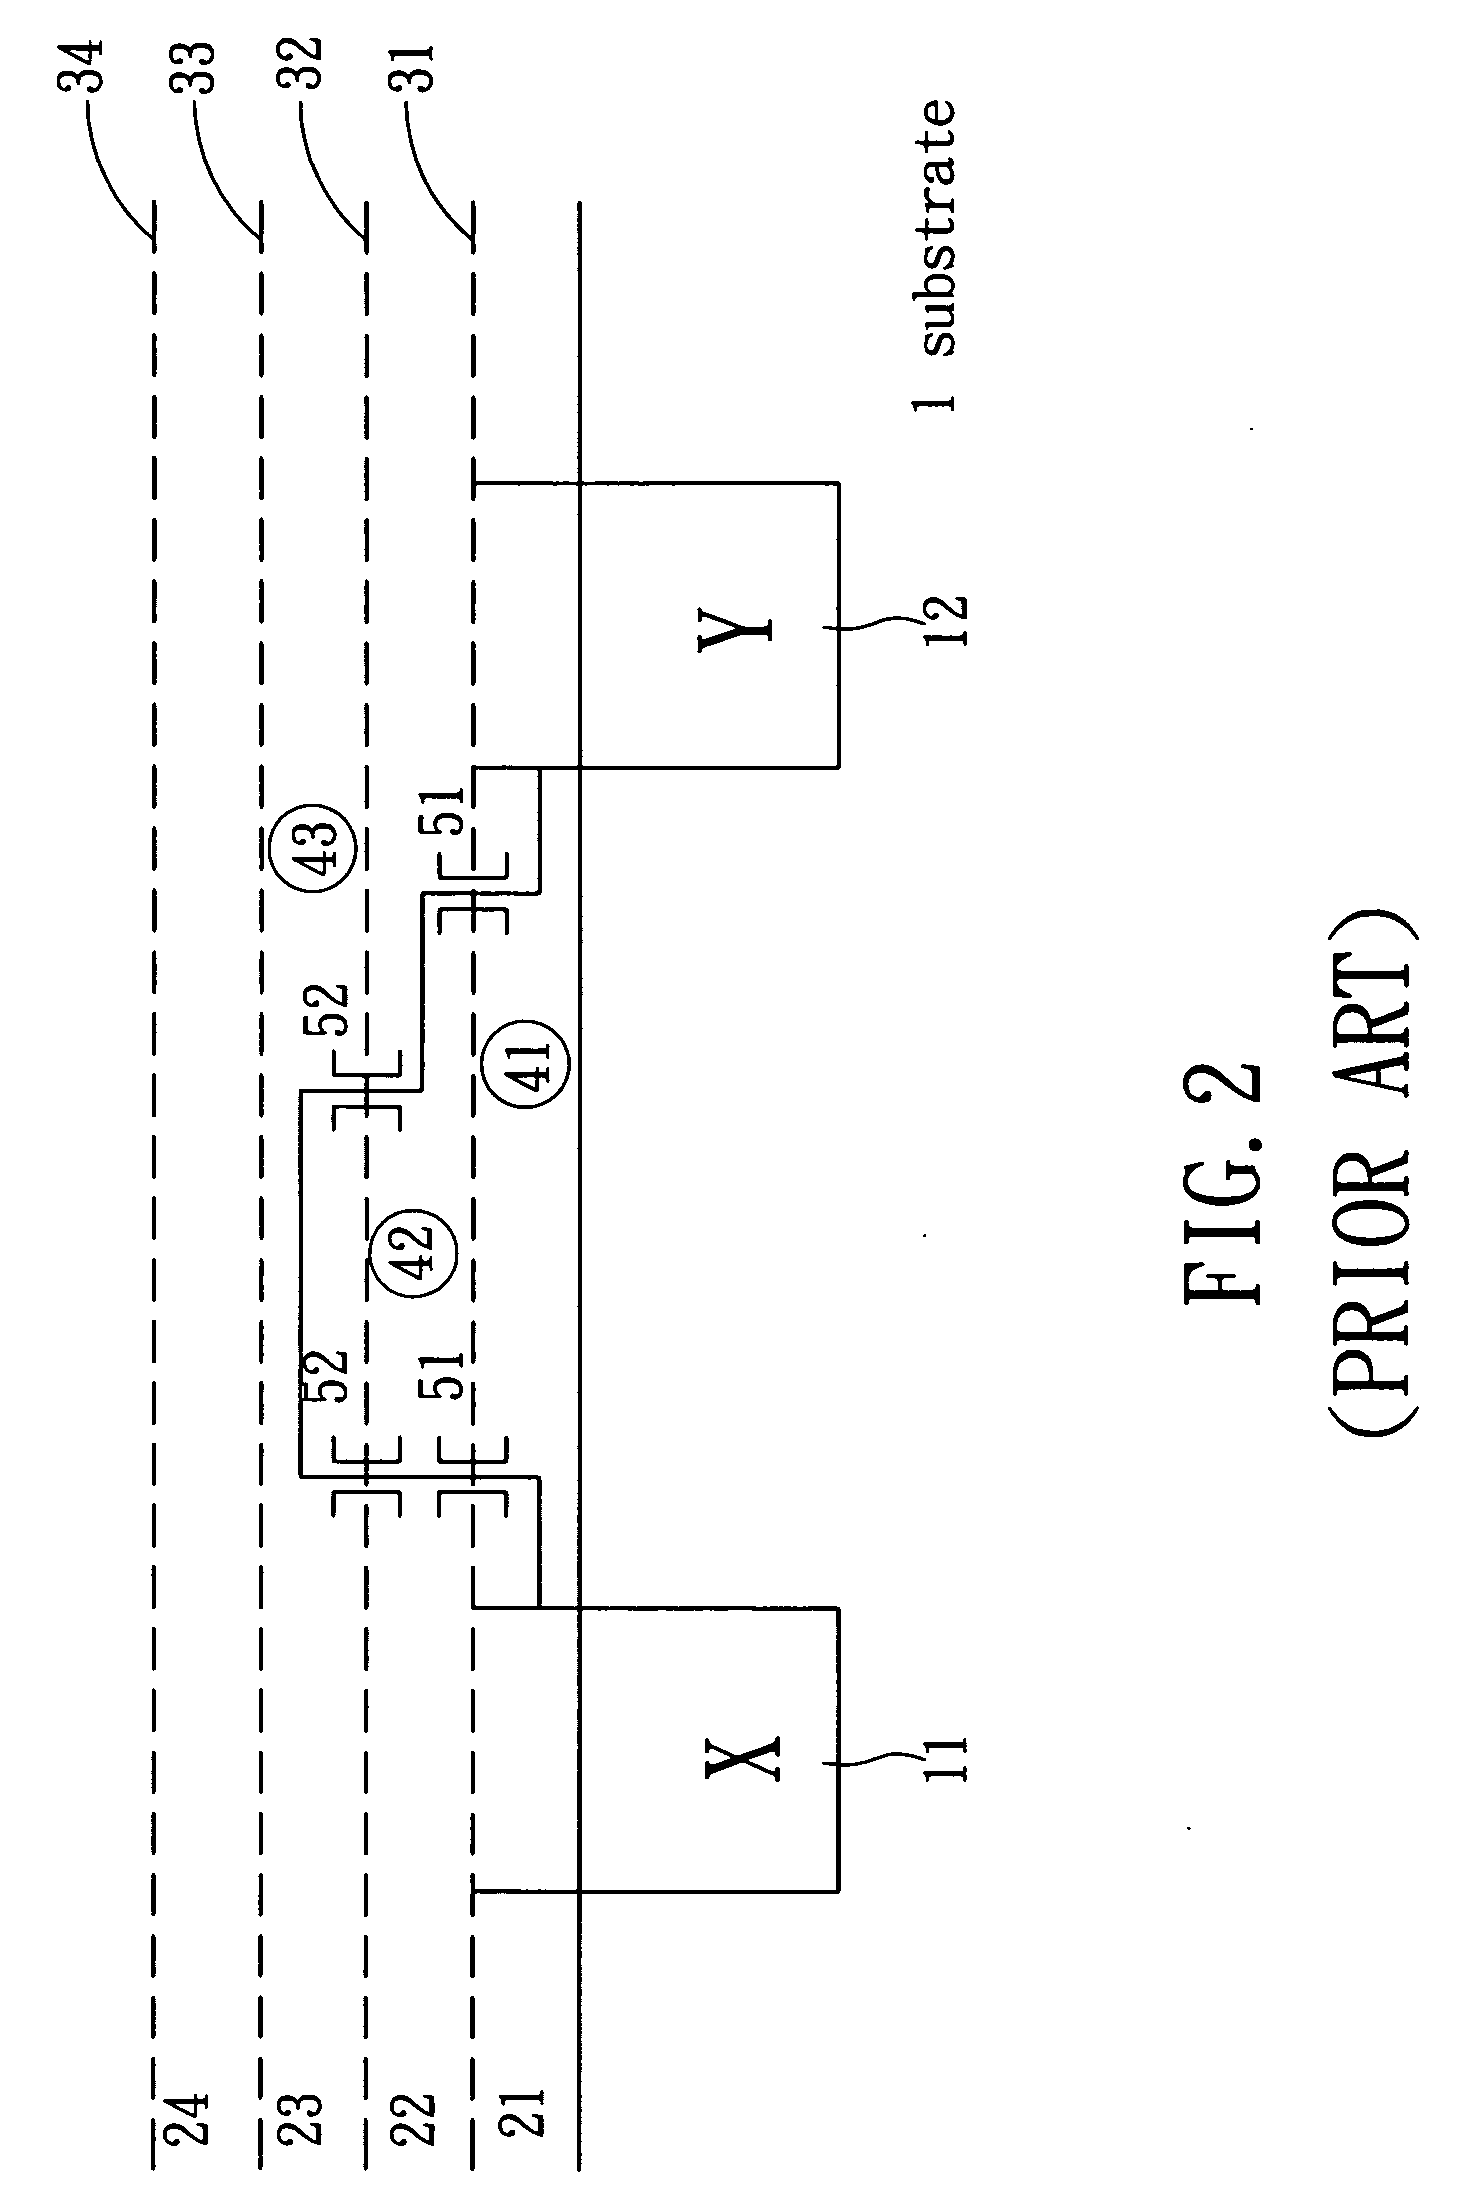 Integrated circuit structure and a design method thereof